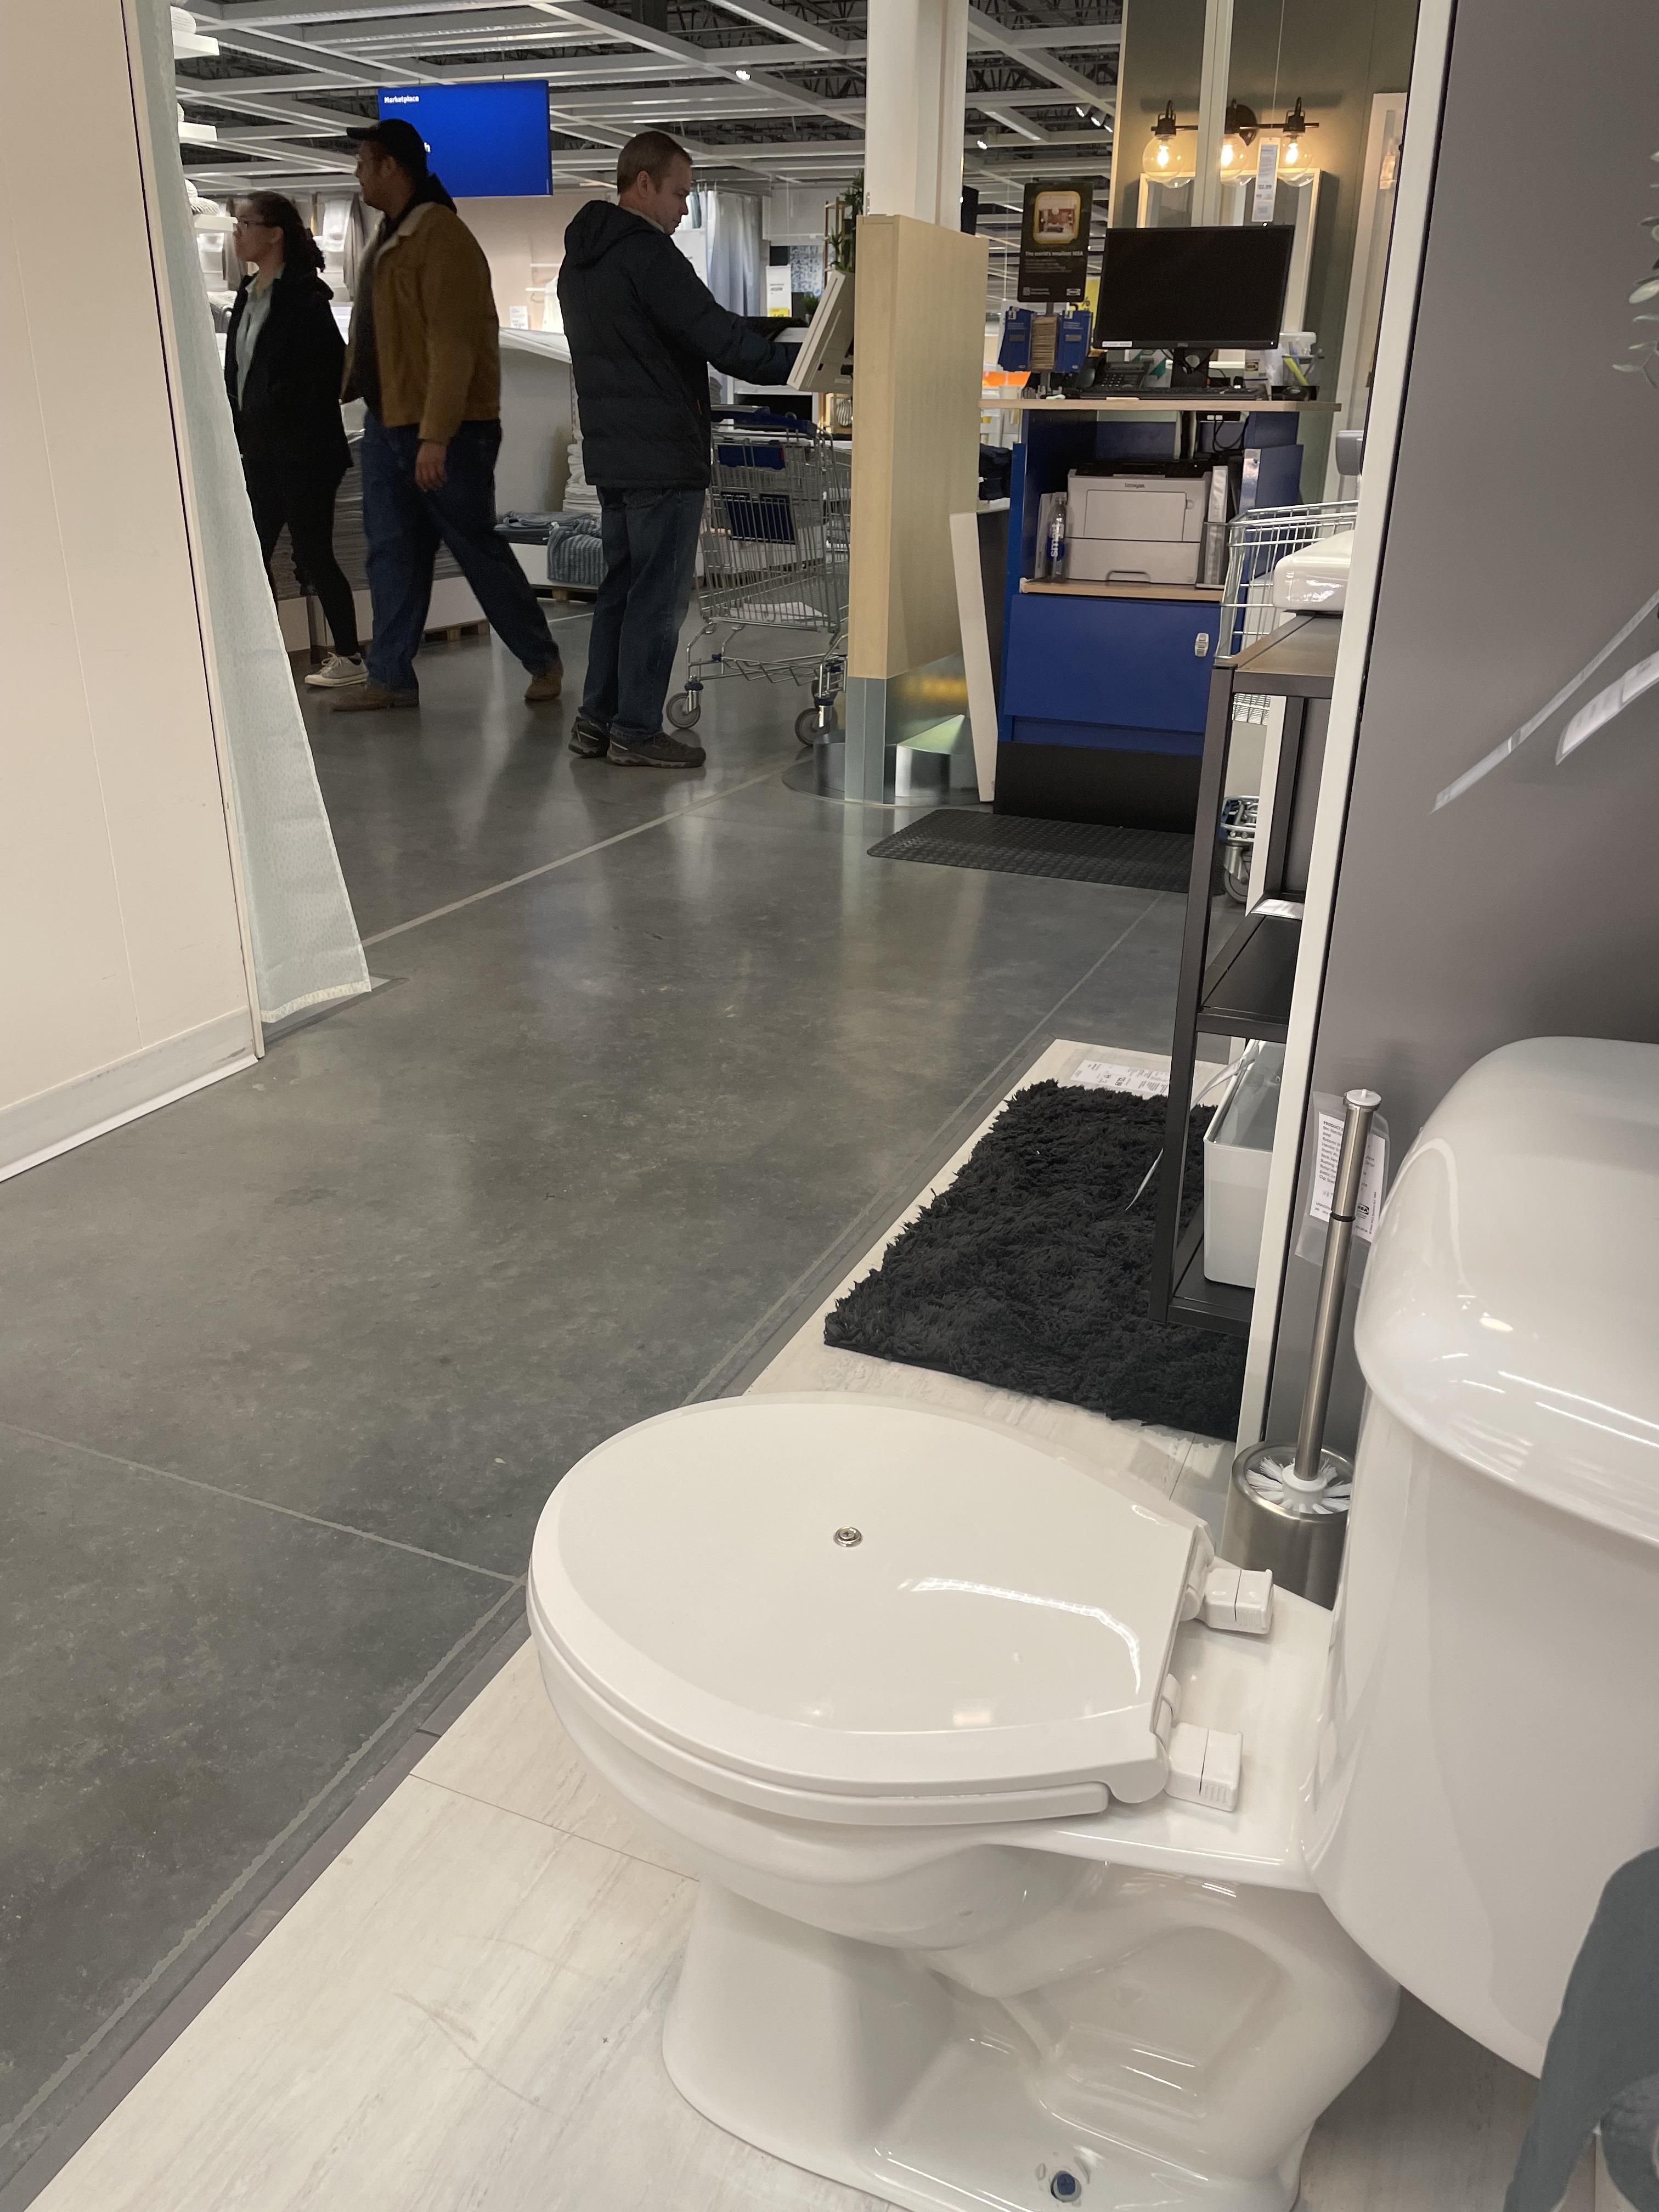 I’m at IKEA right now, and all the toilets in the bathroom displays are screwed shut so nobody can take a sh*t in them. They must’ve learned that lesson the hard way.